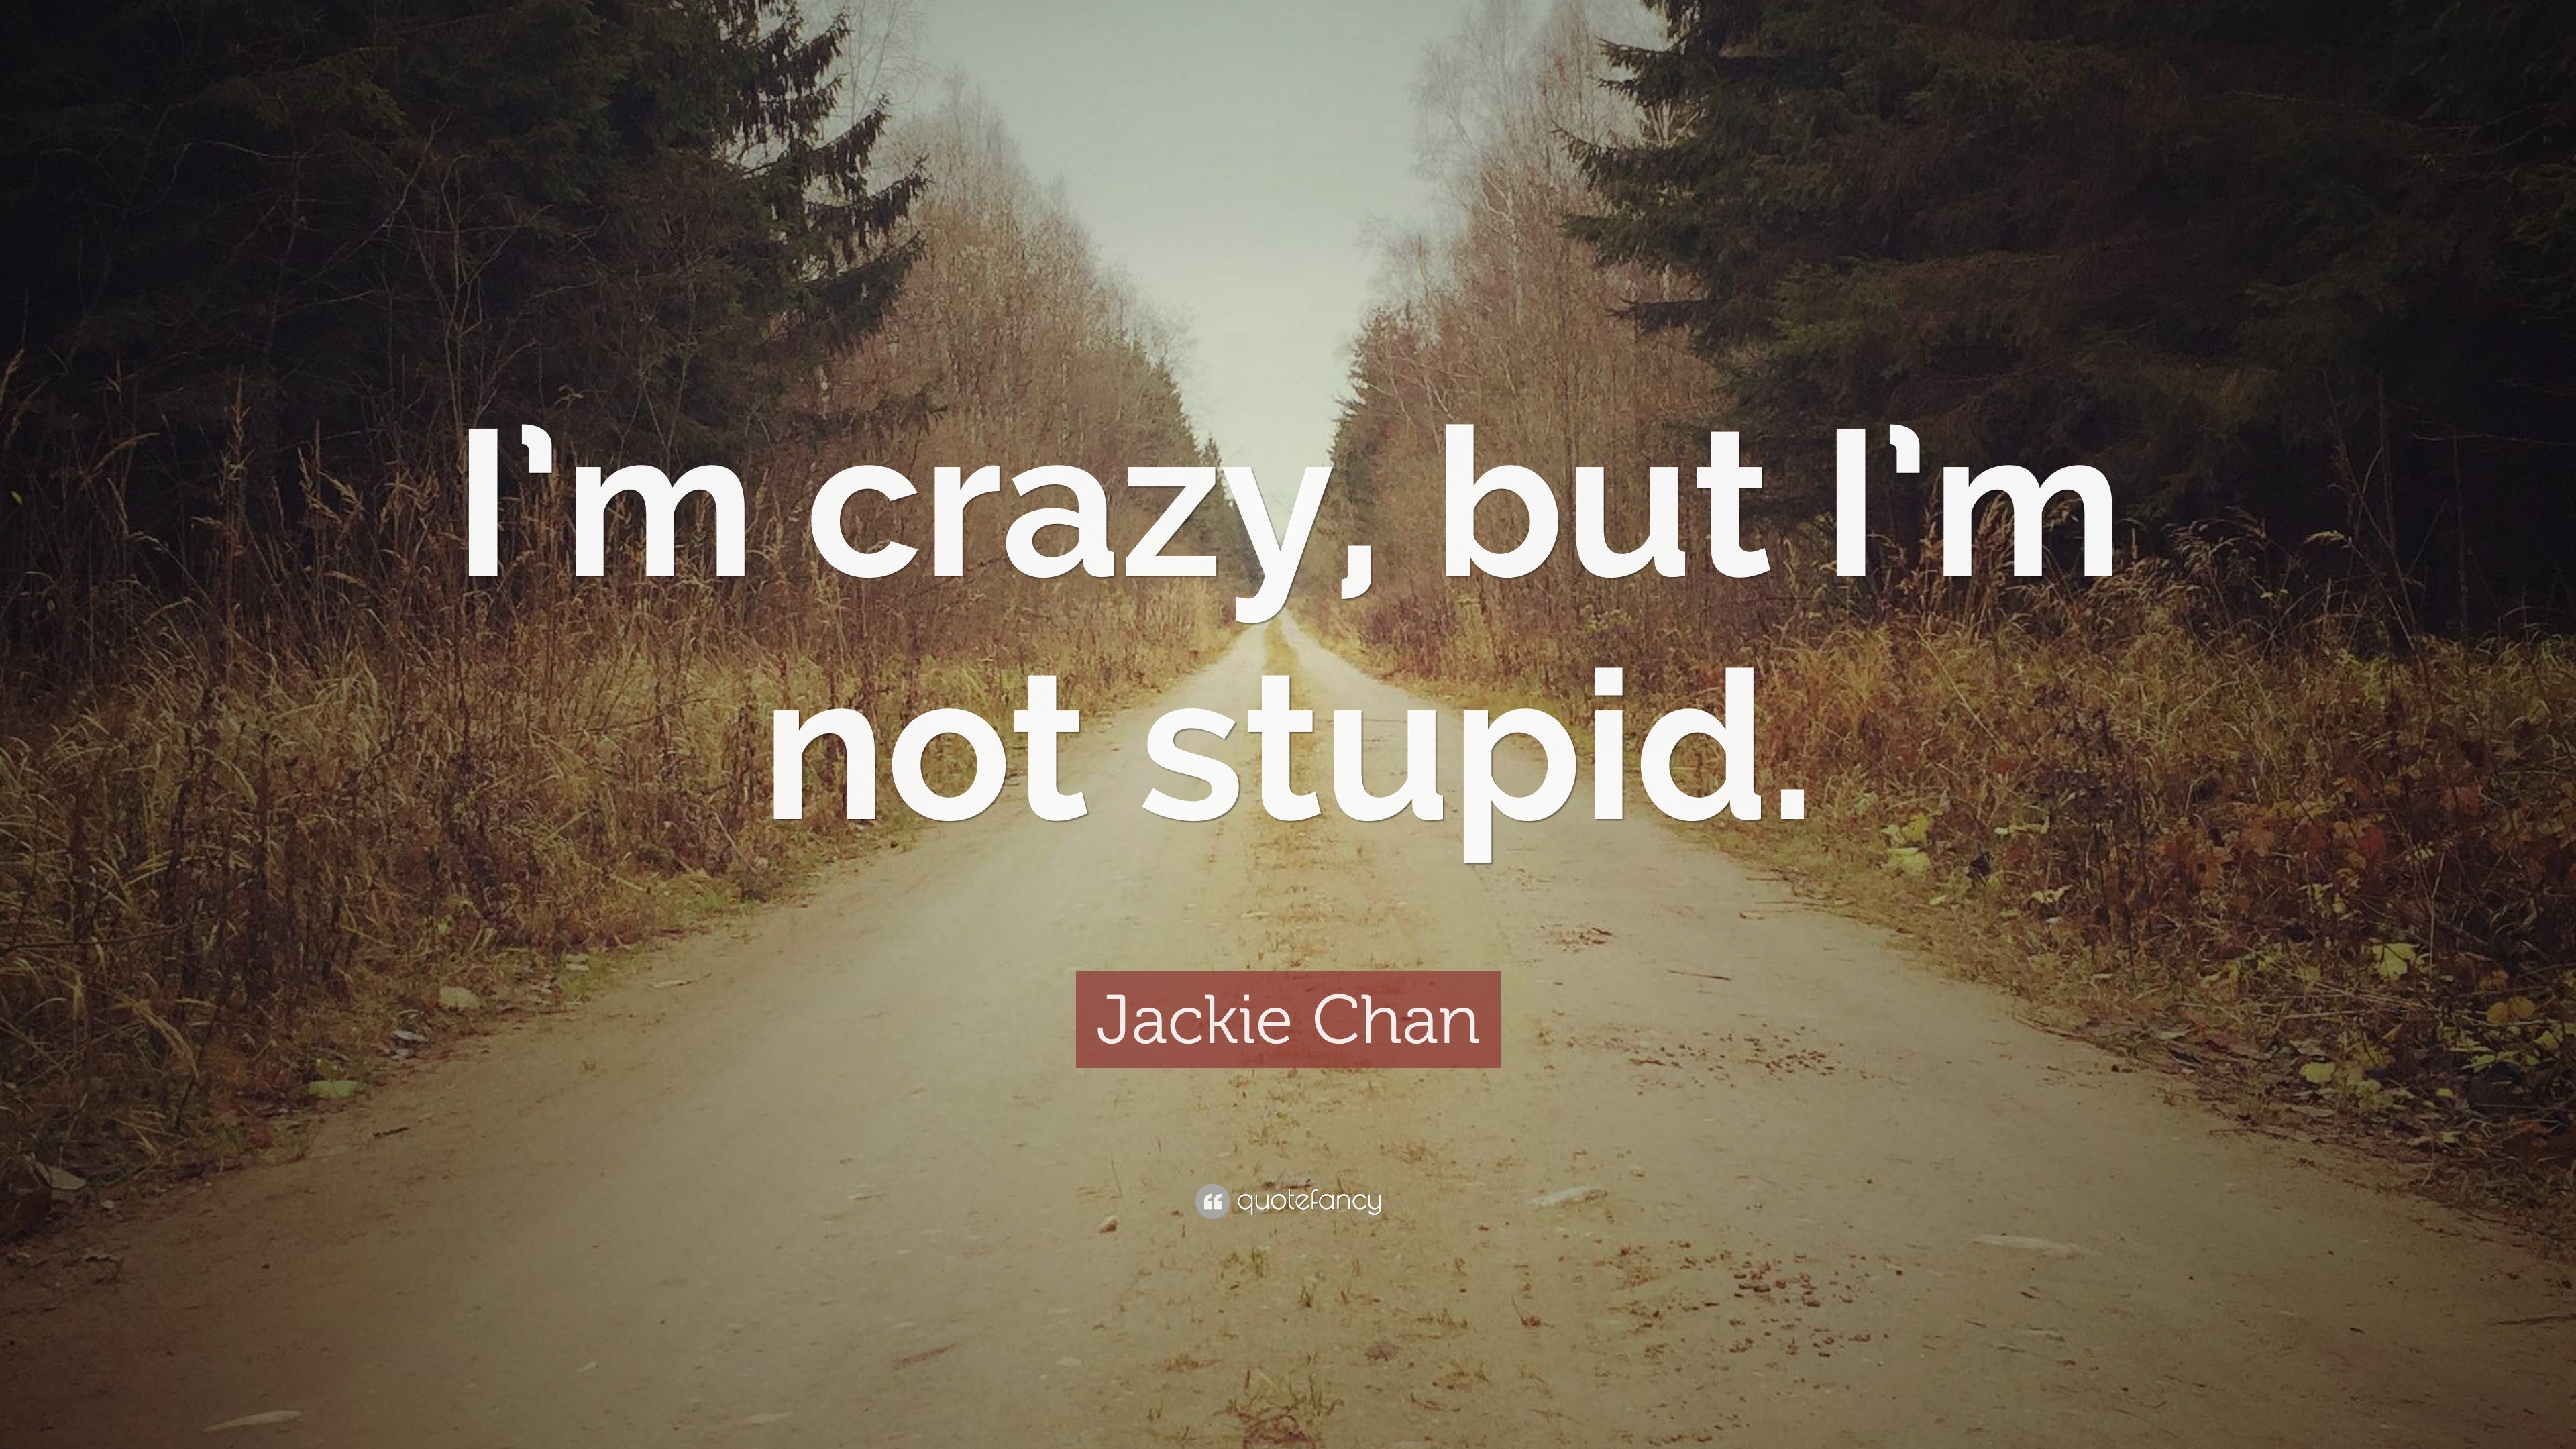 Jackie Chan Quote: "I'm crazy, but I'm not stupid."